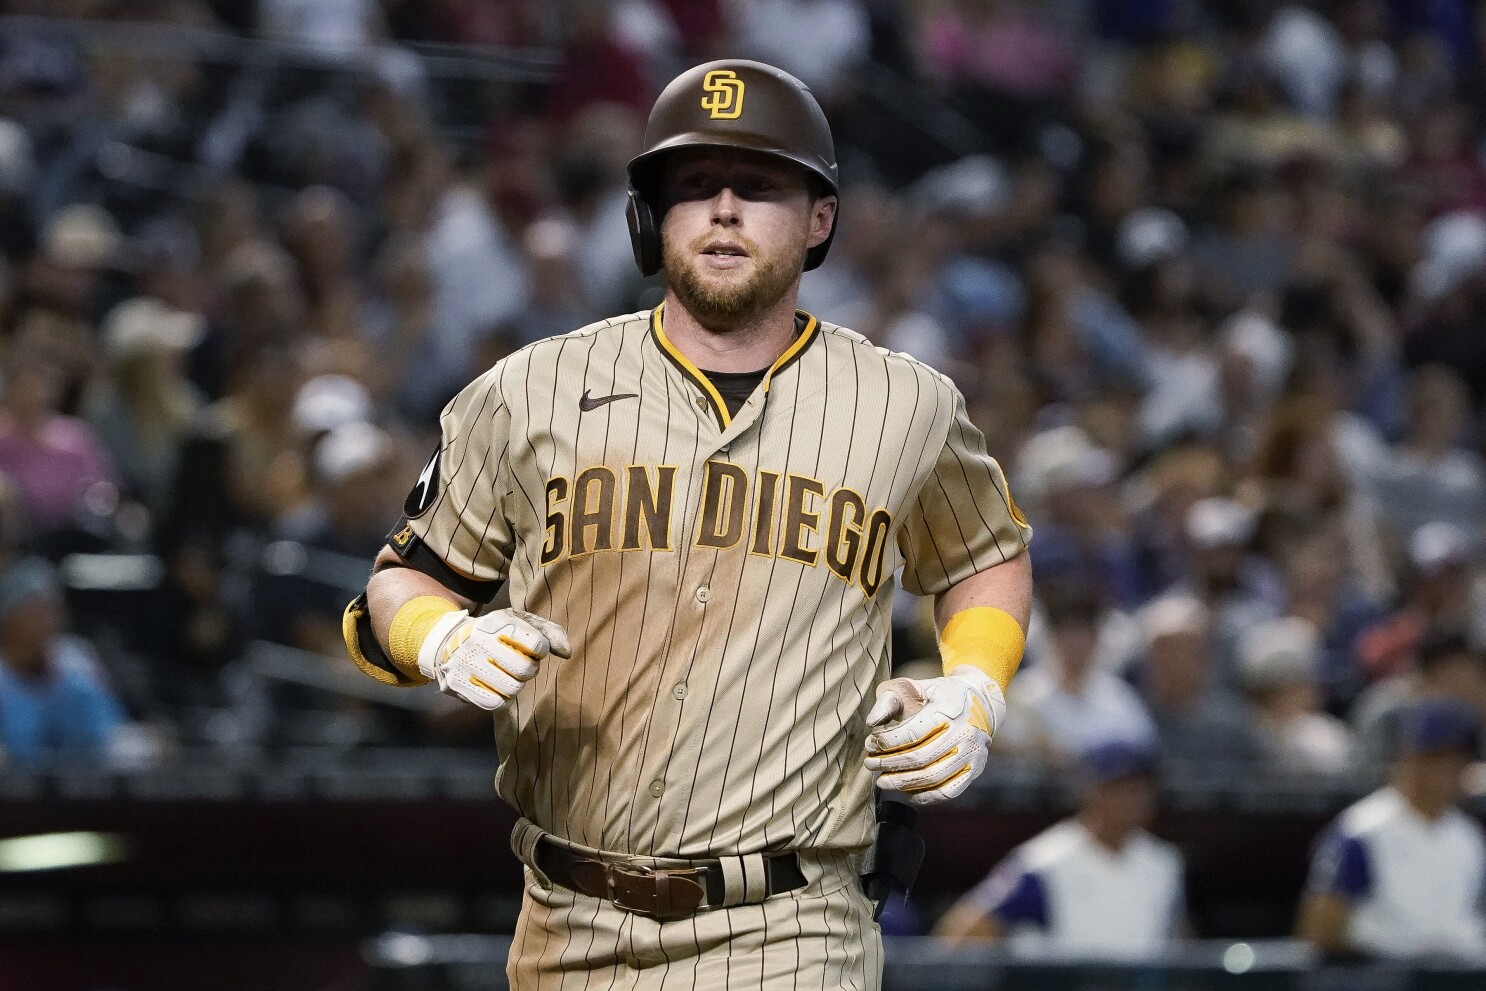 Padres place Jake Cronenworth on the 10-day IL with a fractured right  wrist, ending his season